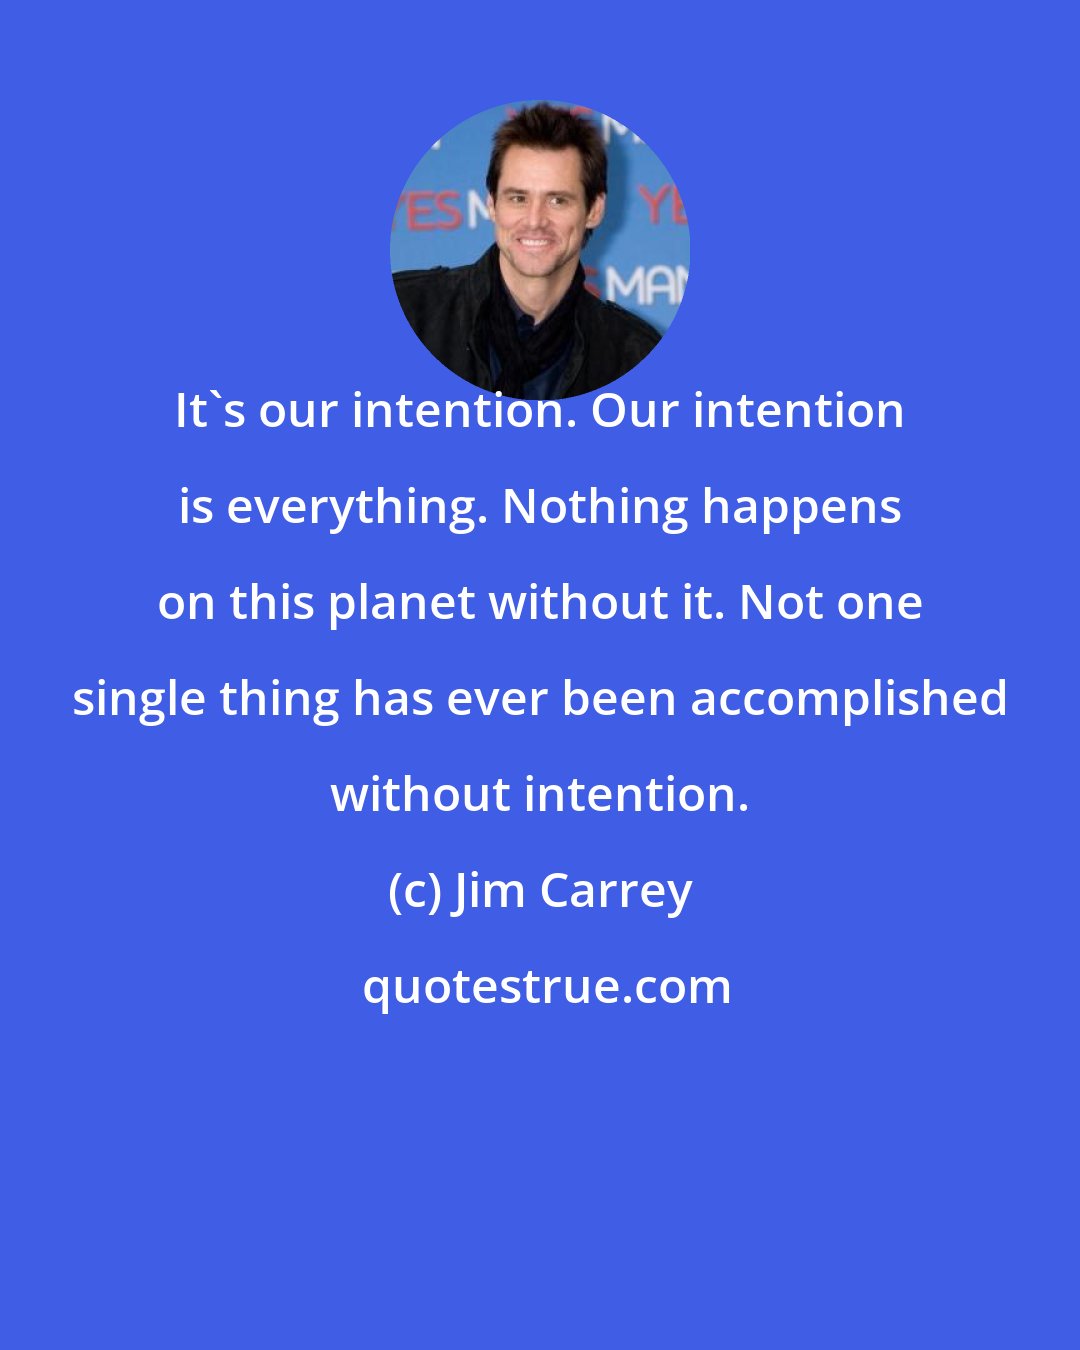 Jim Carrey: It's our intention. Our intention is everything. Nothing happens on this planet without it. Not one single thing has ever been accomplished without intention.